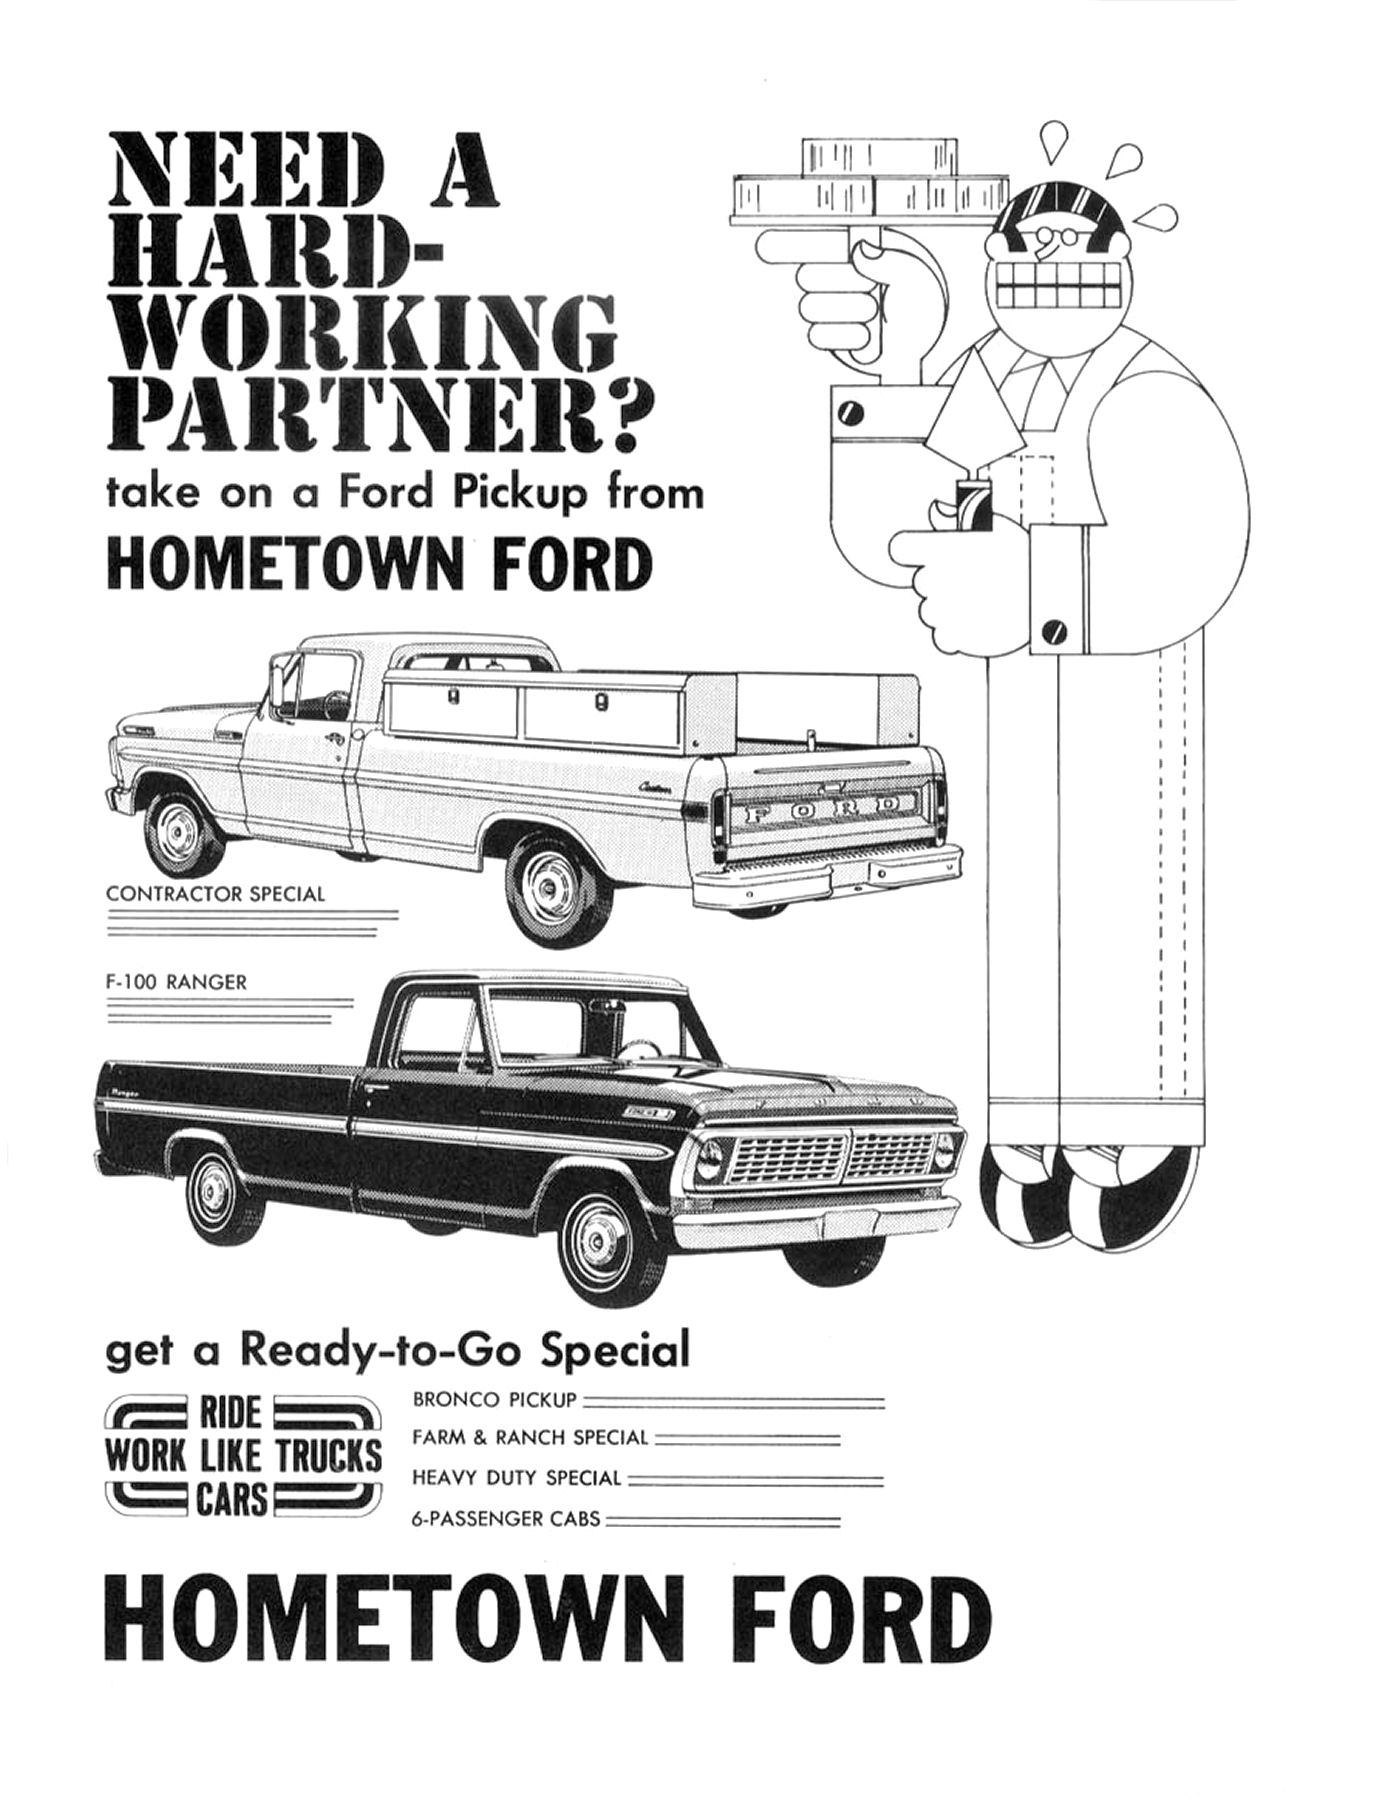 1970 Ford Truck Ad Clipart Book-09